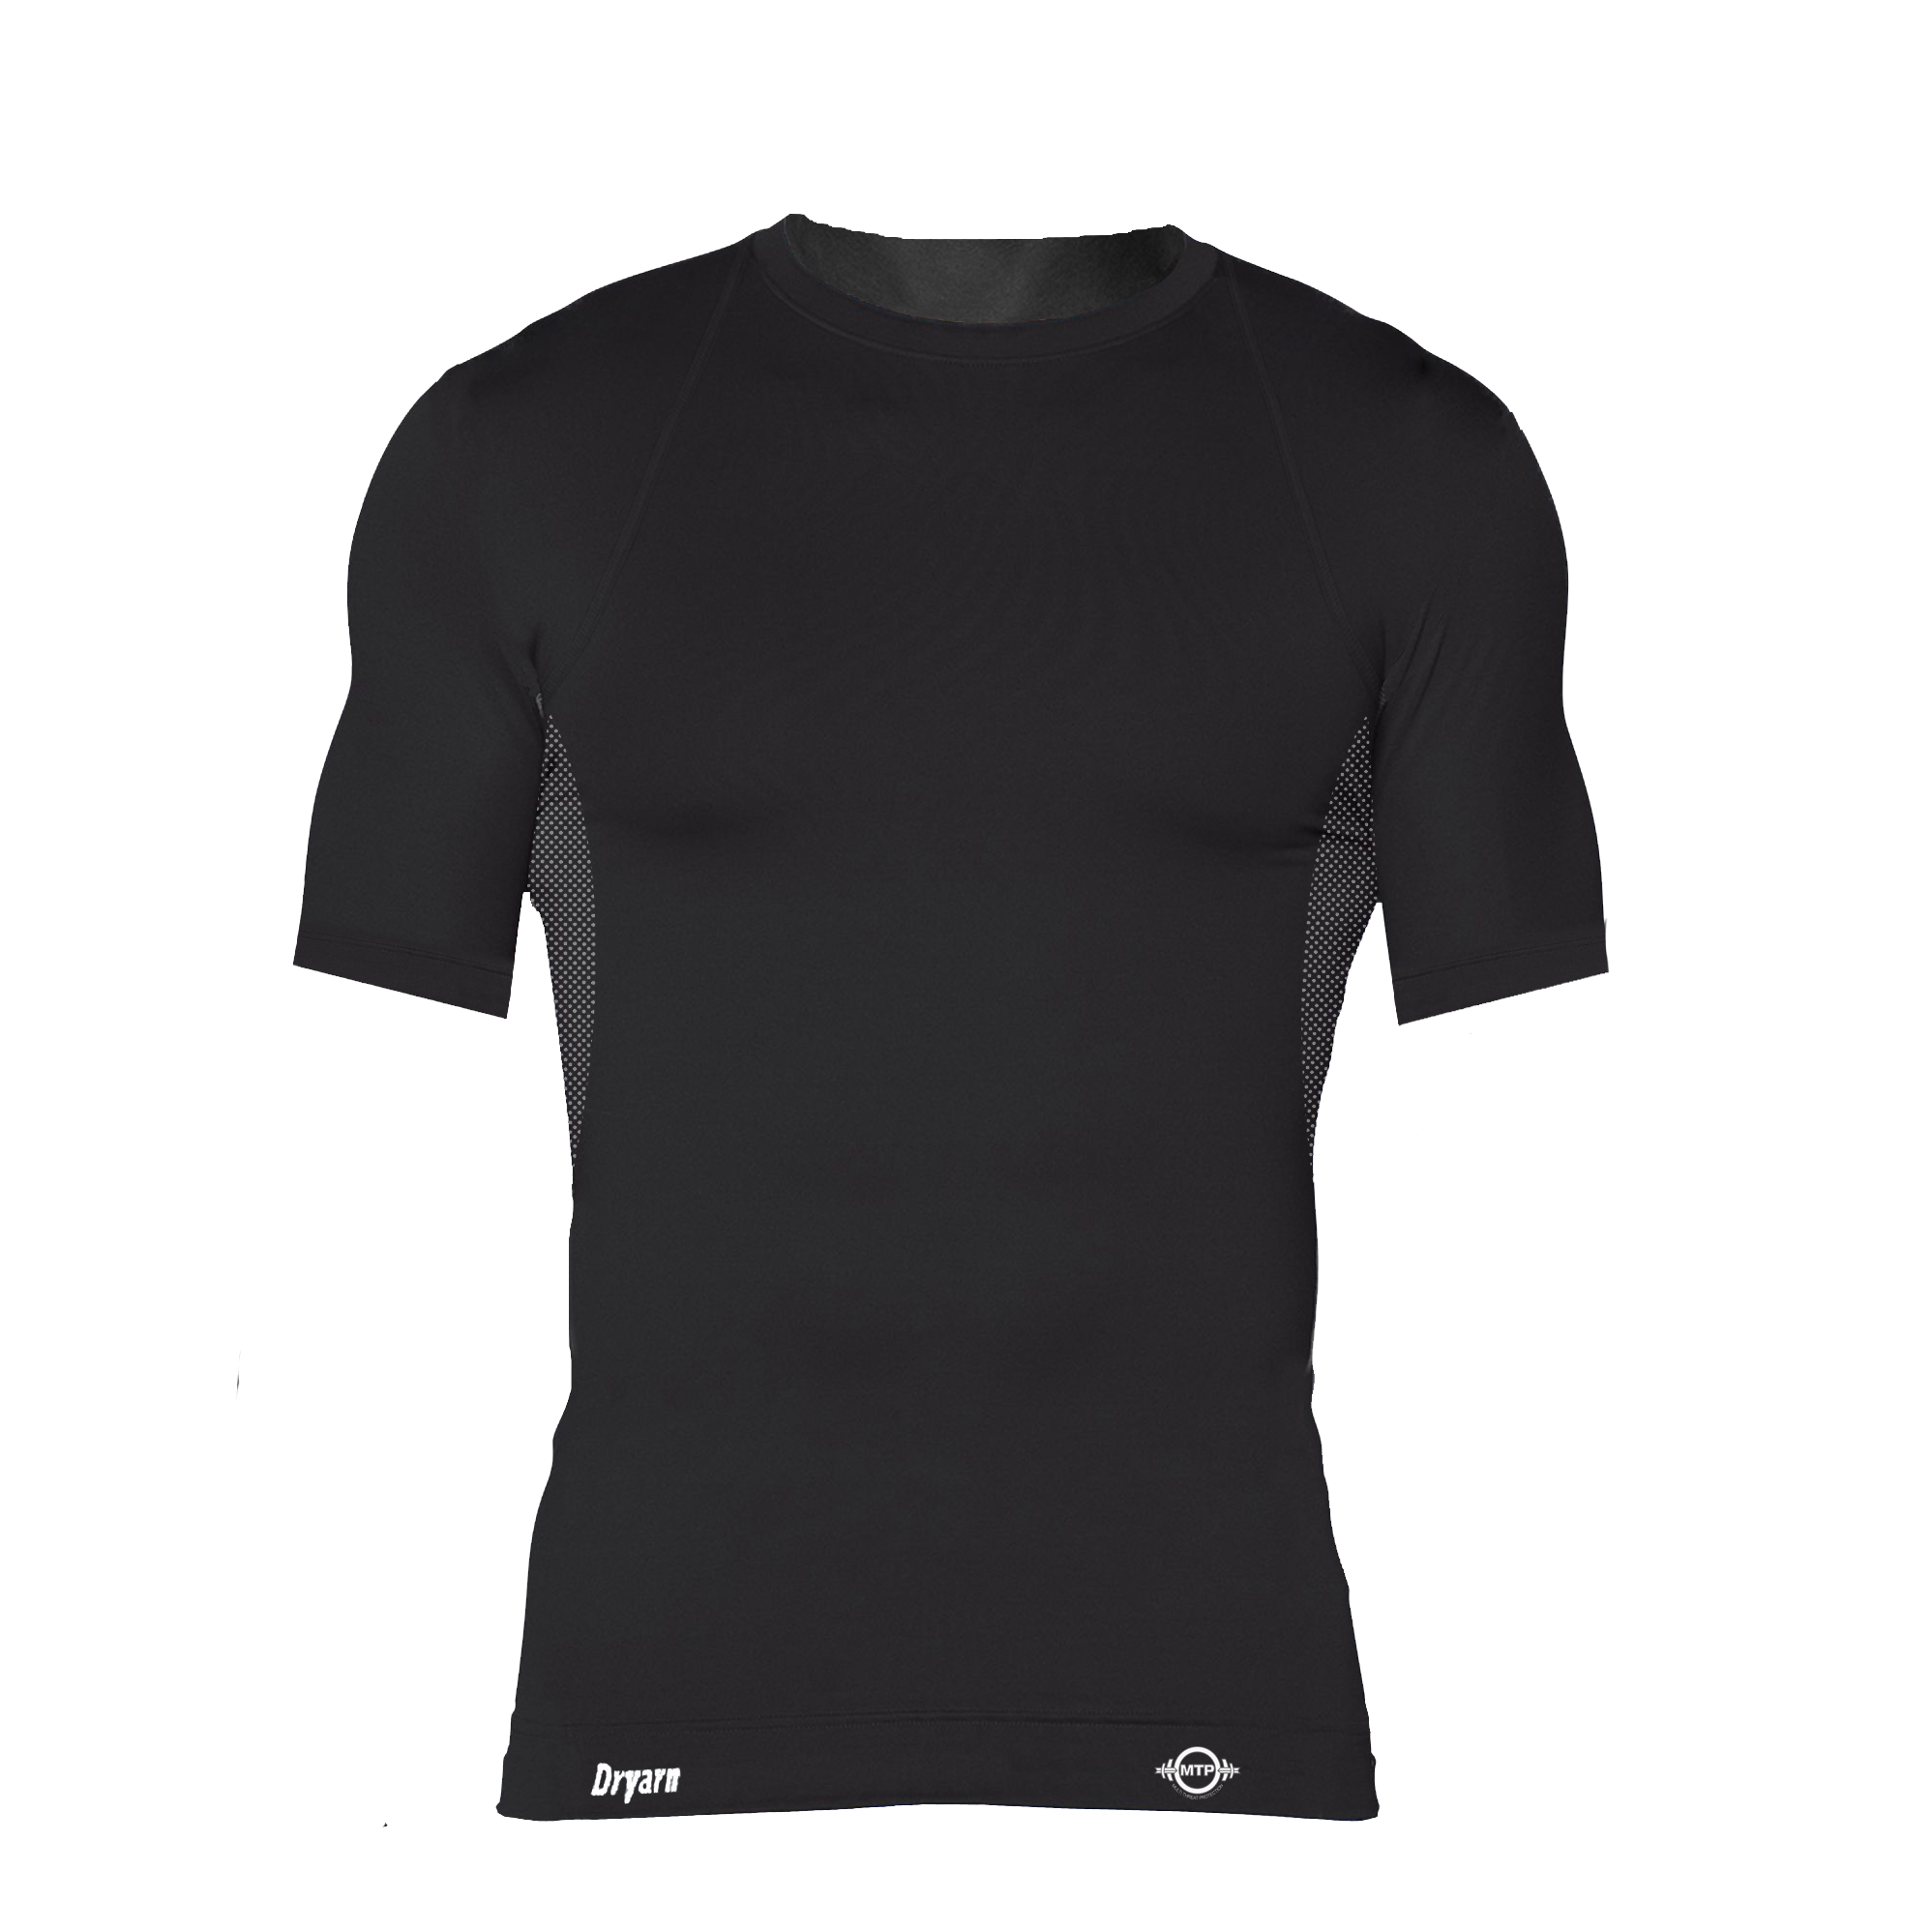 Internal MTP thermal short sleeve t-shirt for winter or summer